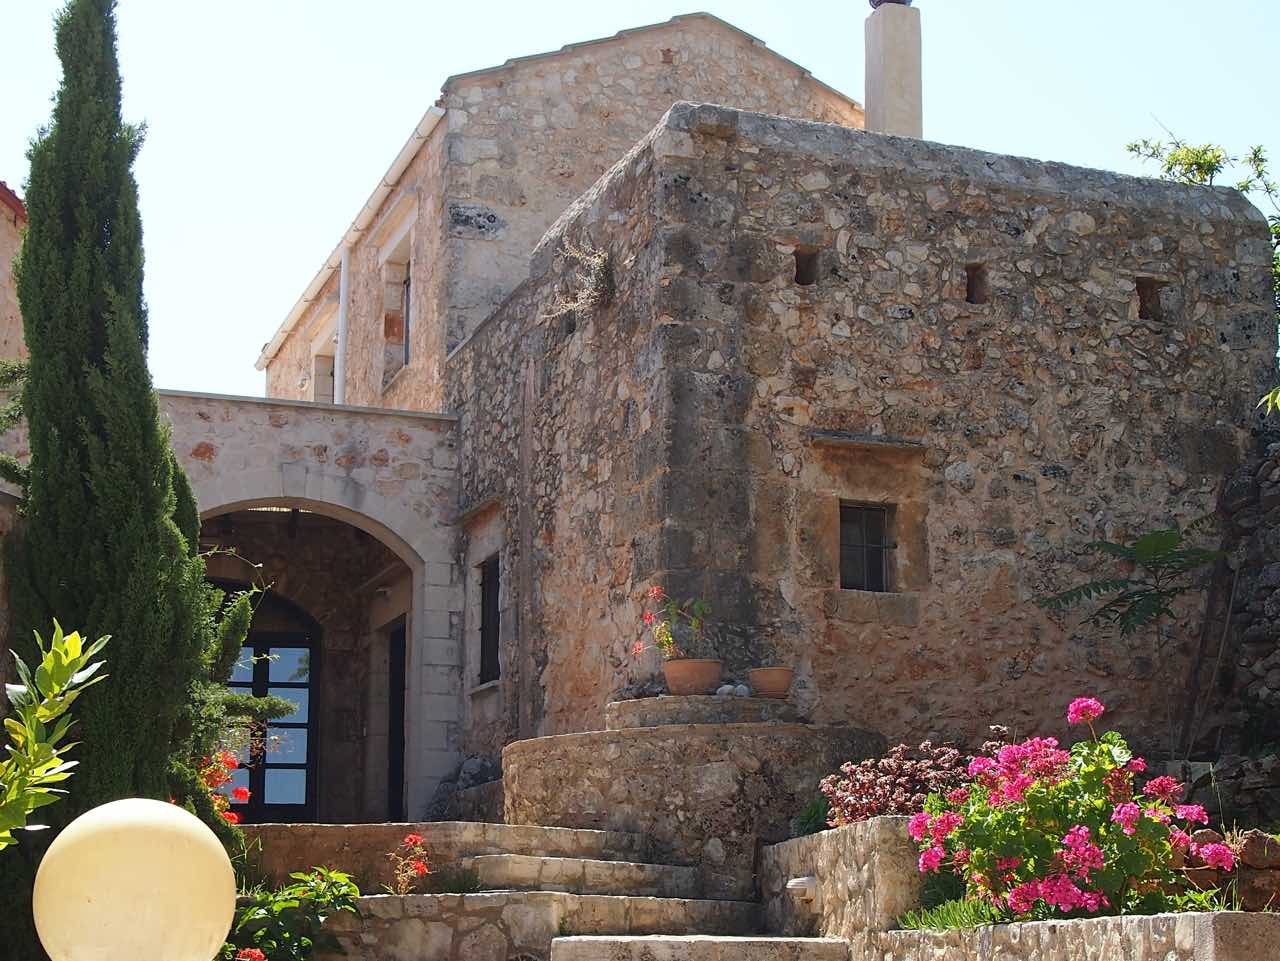 Traditional Villages Experience In Chania Crete, traditional villases private tour, traditional village excursion, cretan food, social tour chania crete, best private tour chania crete, activities chania crete, history culture tour chania, agrotourism ethnography chania crete